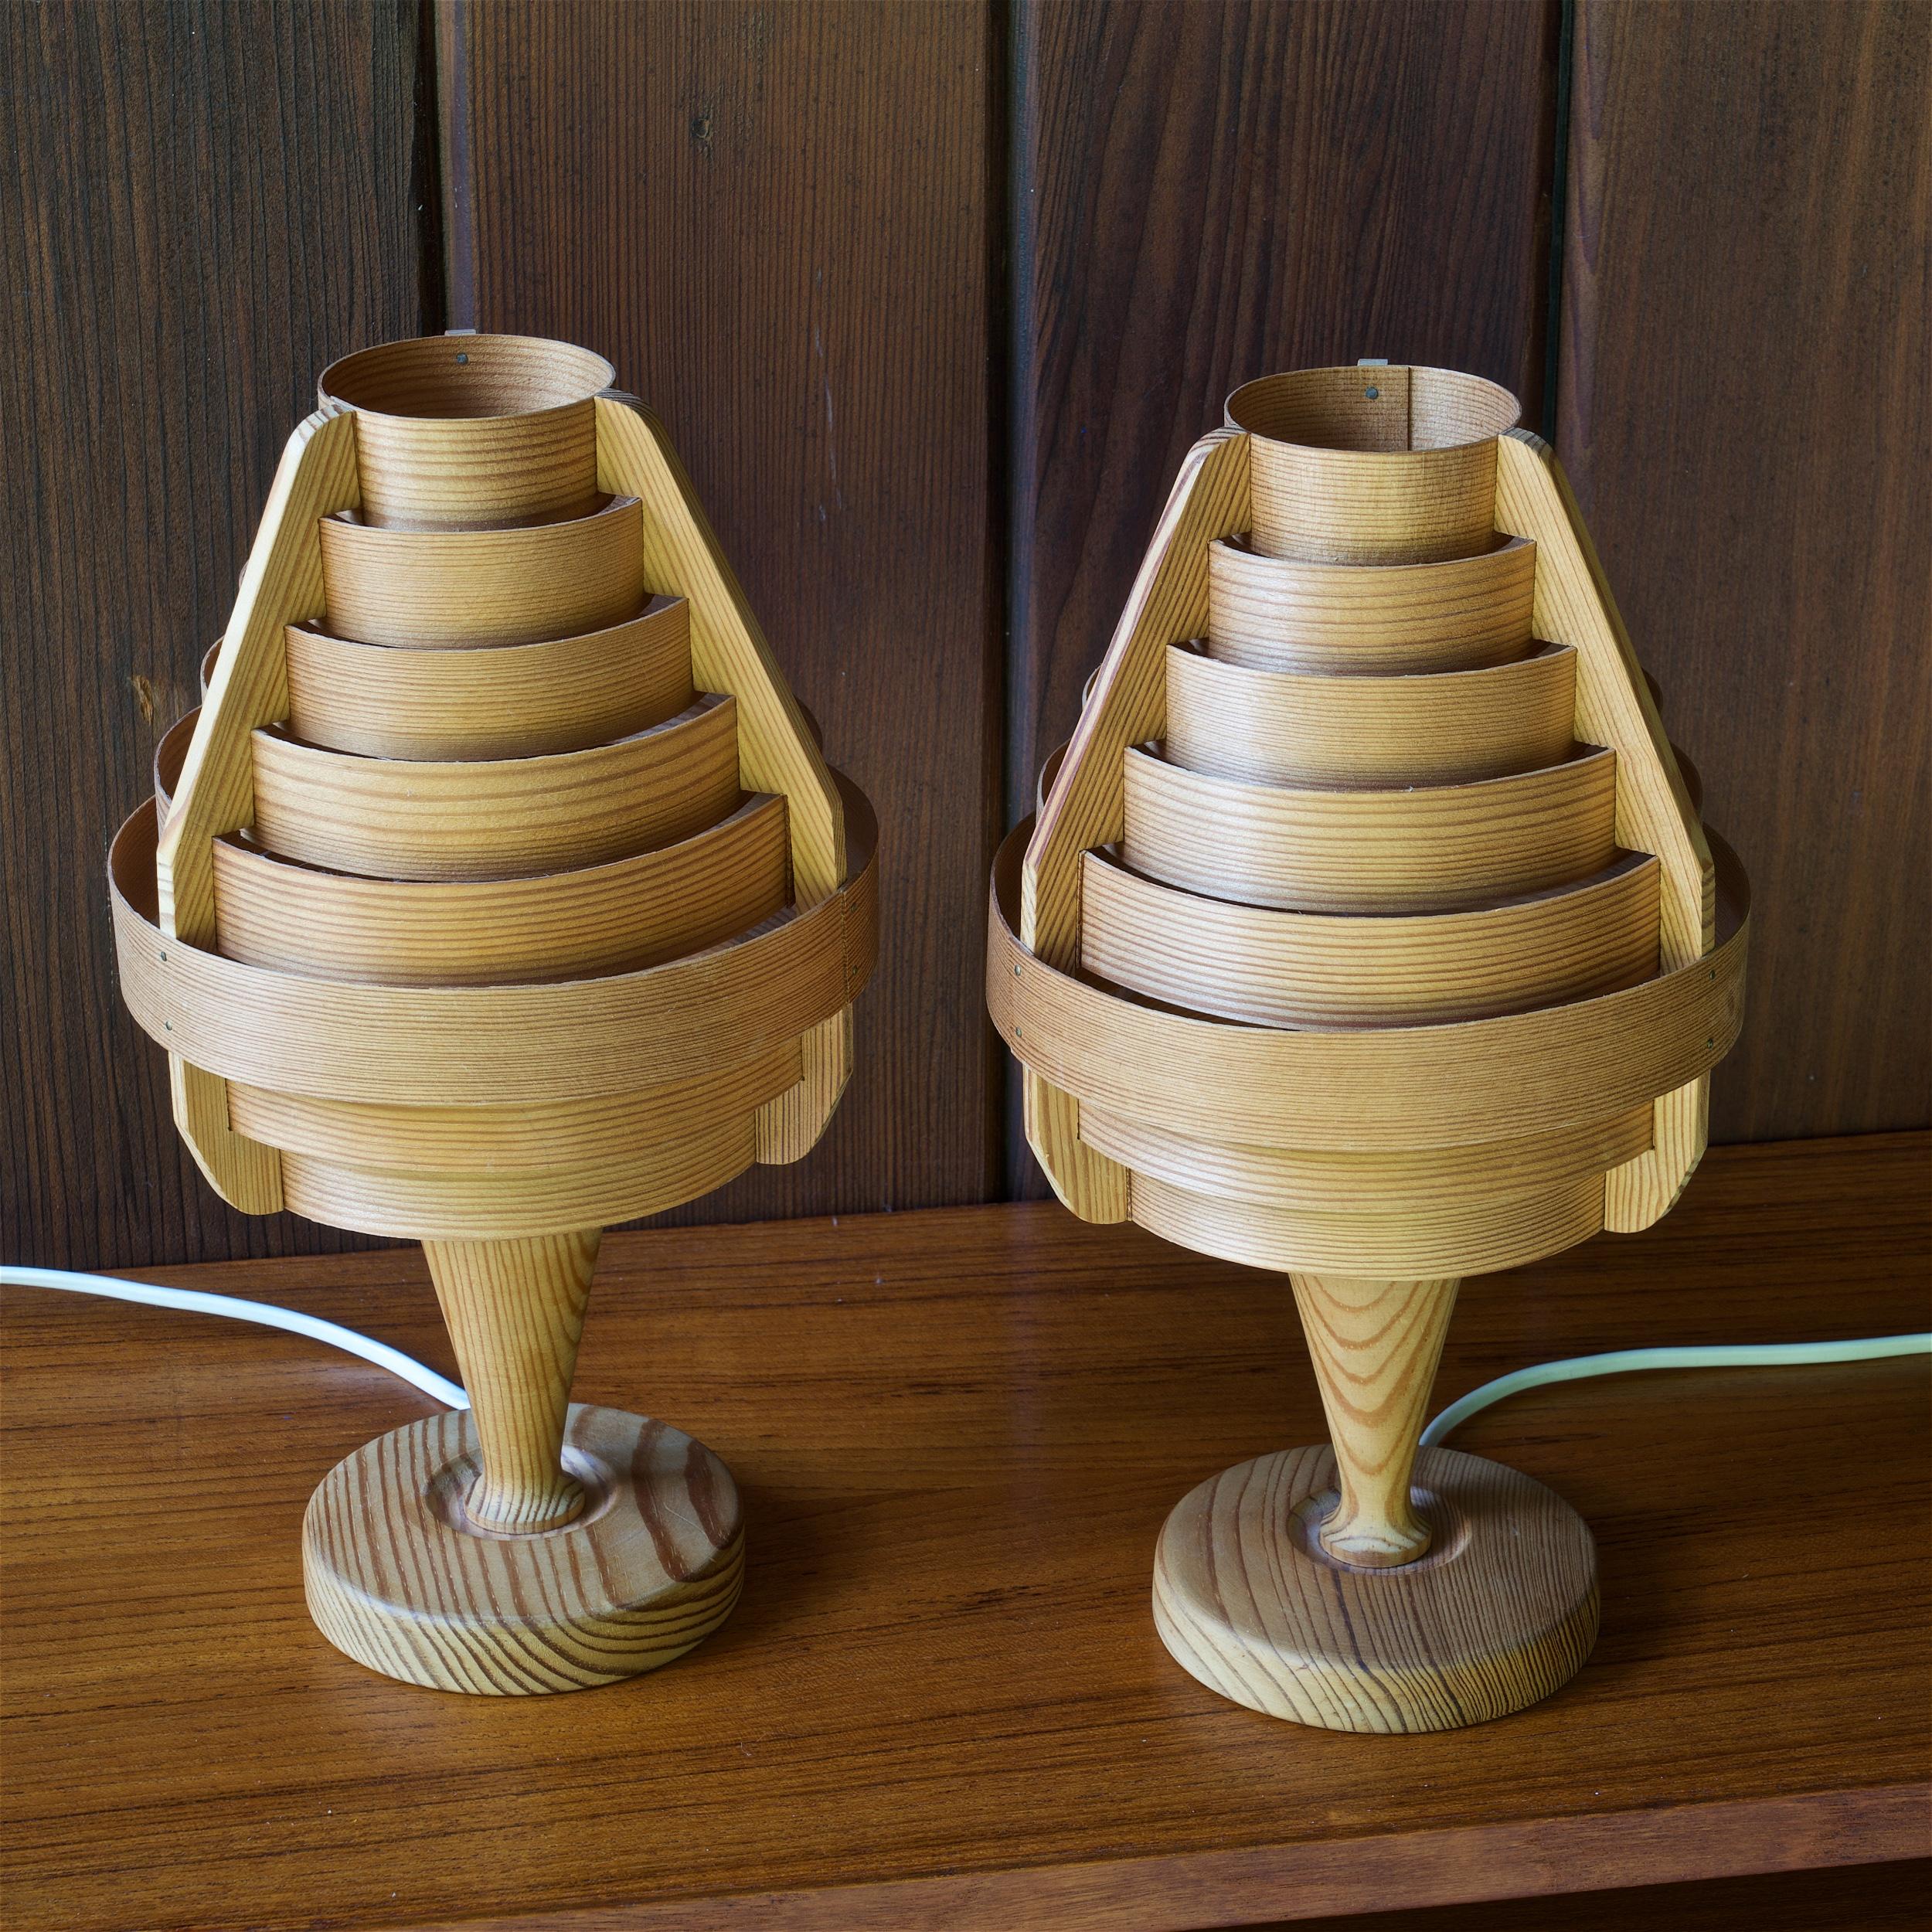 A pair of 1960s wooden bedroom table lamps designed and produced by Hans-Agne Jakobsson for AB Ellysett, Markaryd, Sweden. Executed in fine pine strips and turned pine bases. Very delicate organic architectural lamp series. The thin wood acts as a